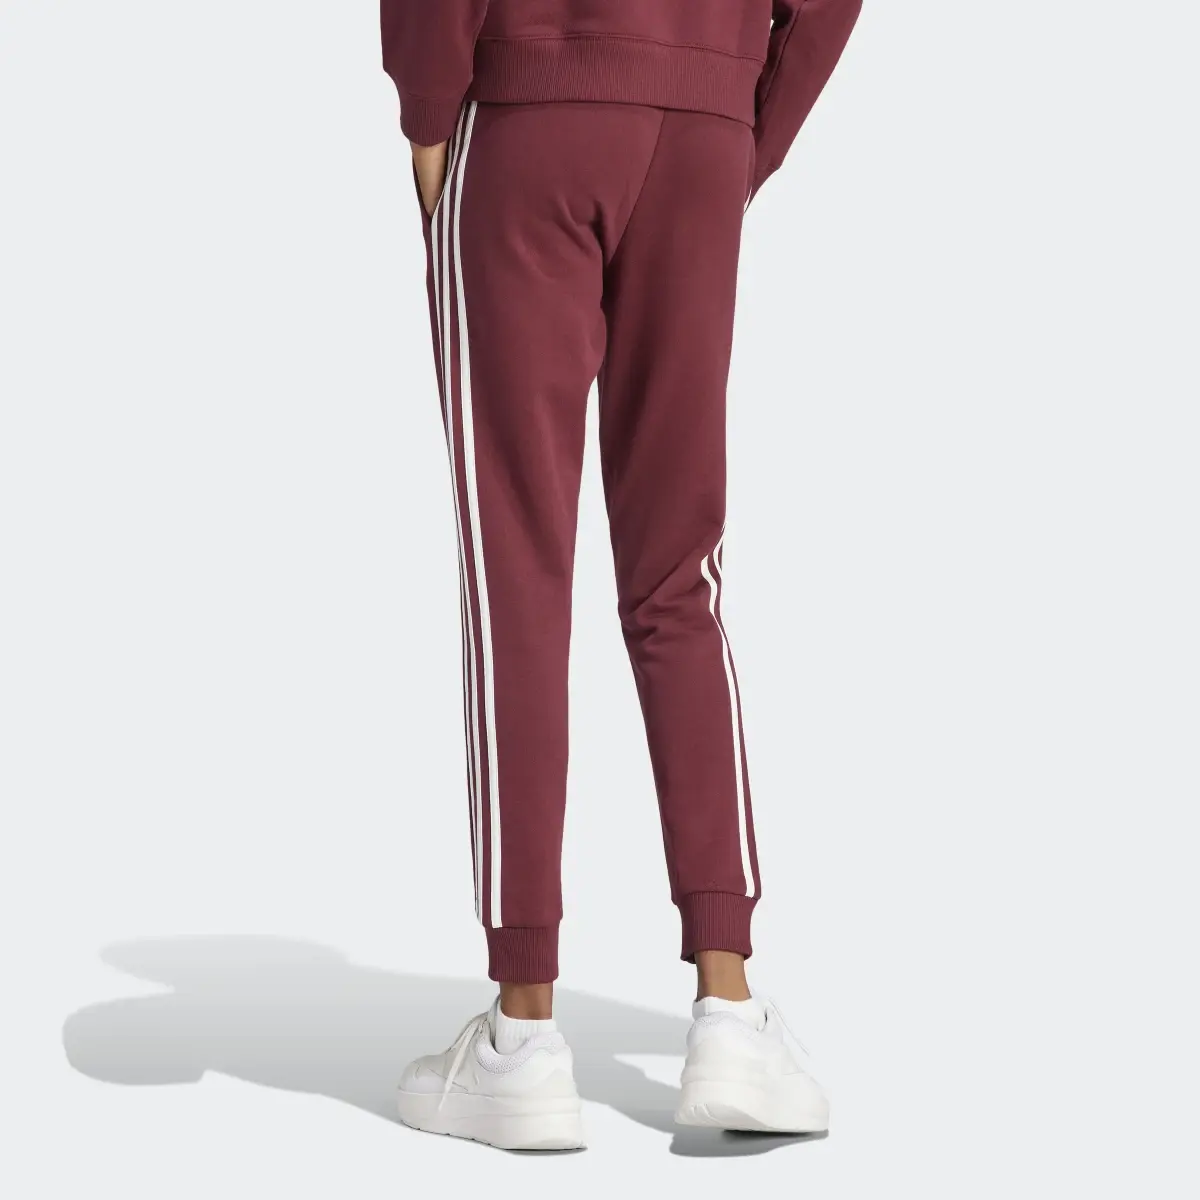 Adidas Essentials 3-Stripes French Terry Cuffed Pants. 2